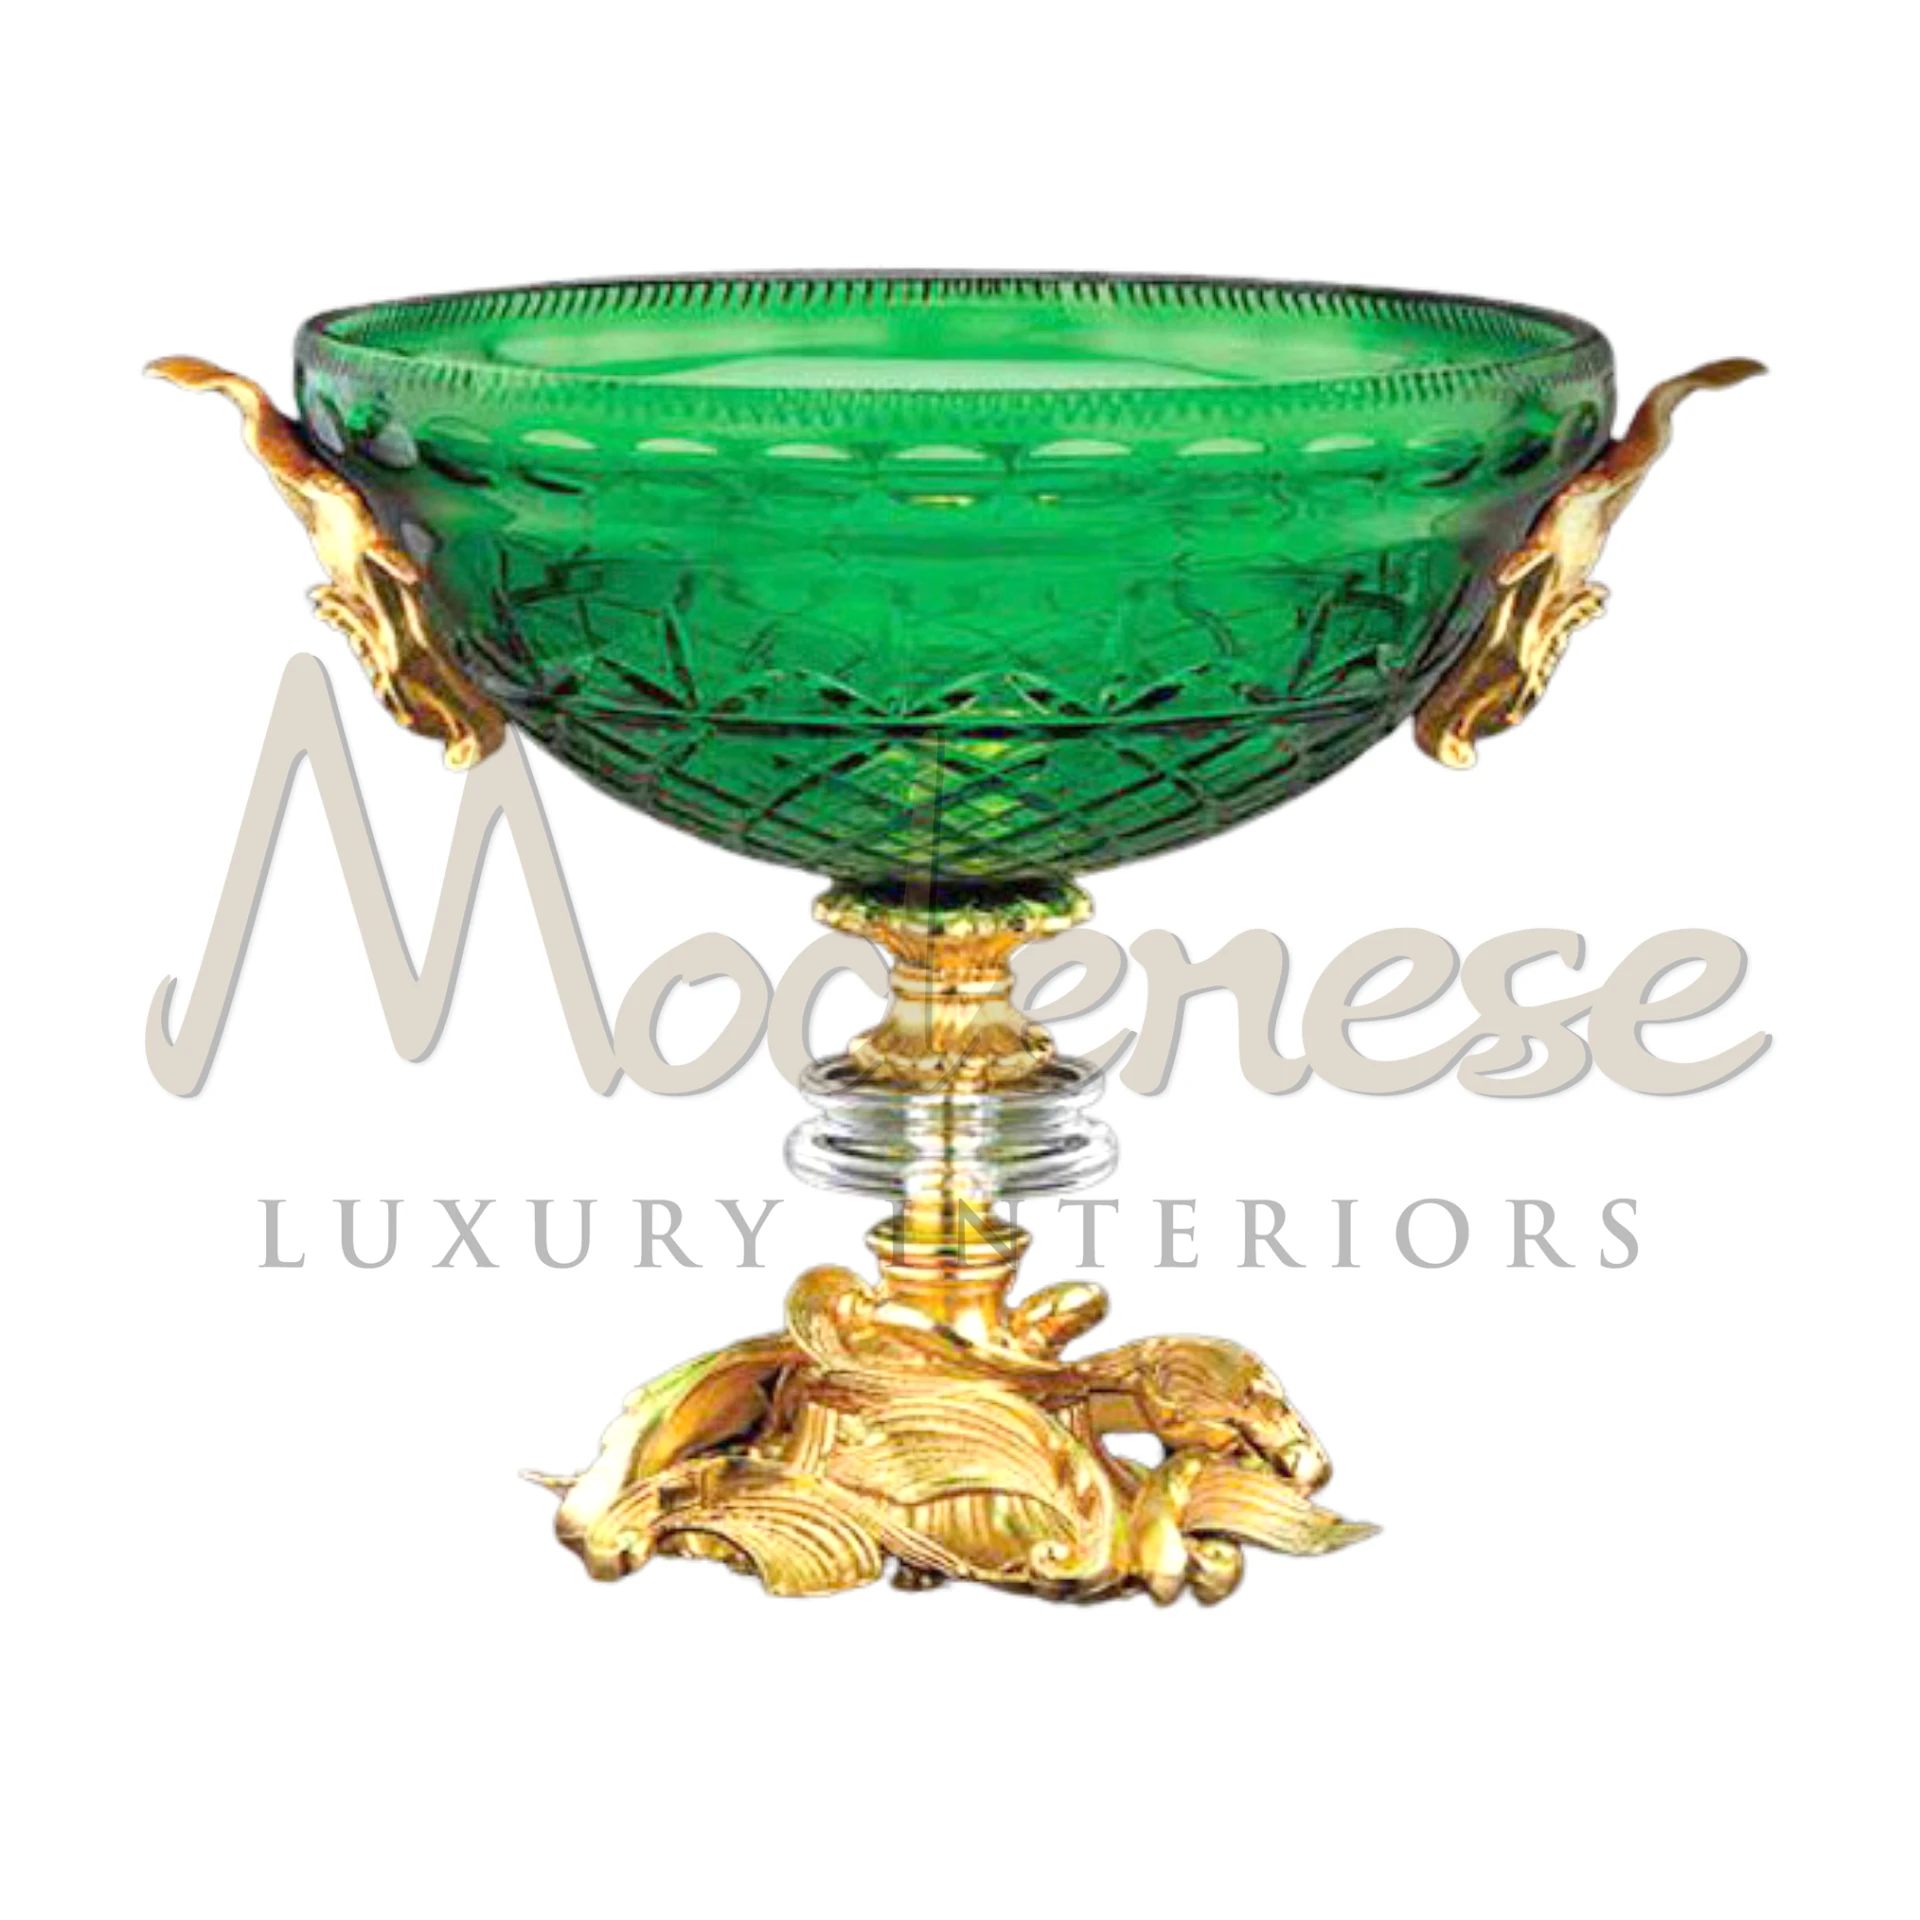 Classical Green Glass Bowl in Baroque style, perfect for luxury interior design, showcasing smooth curves and symmetrical etched glass.
